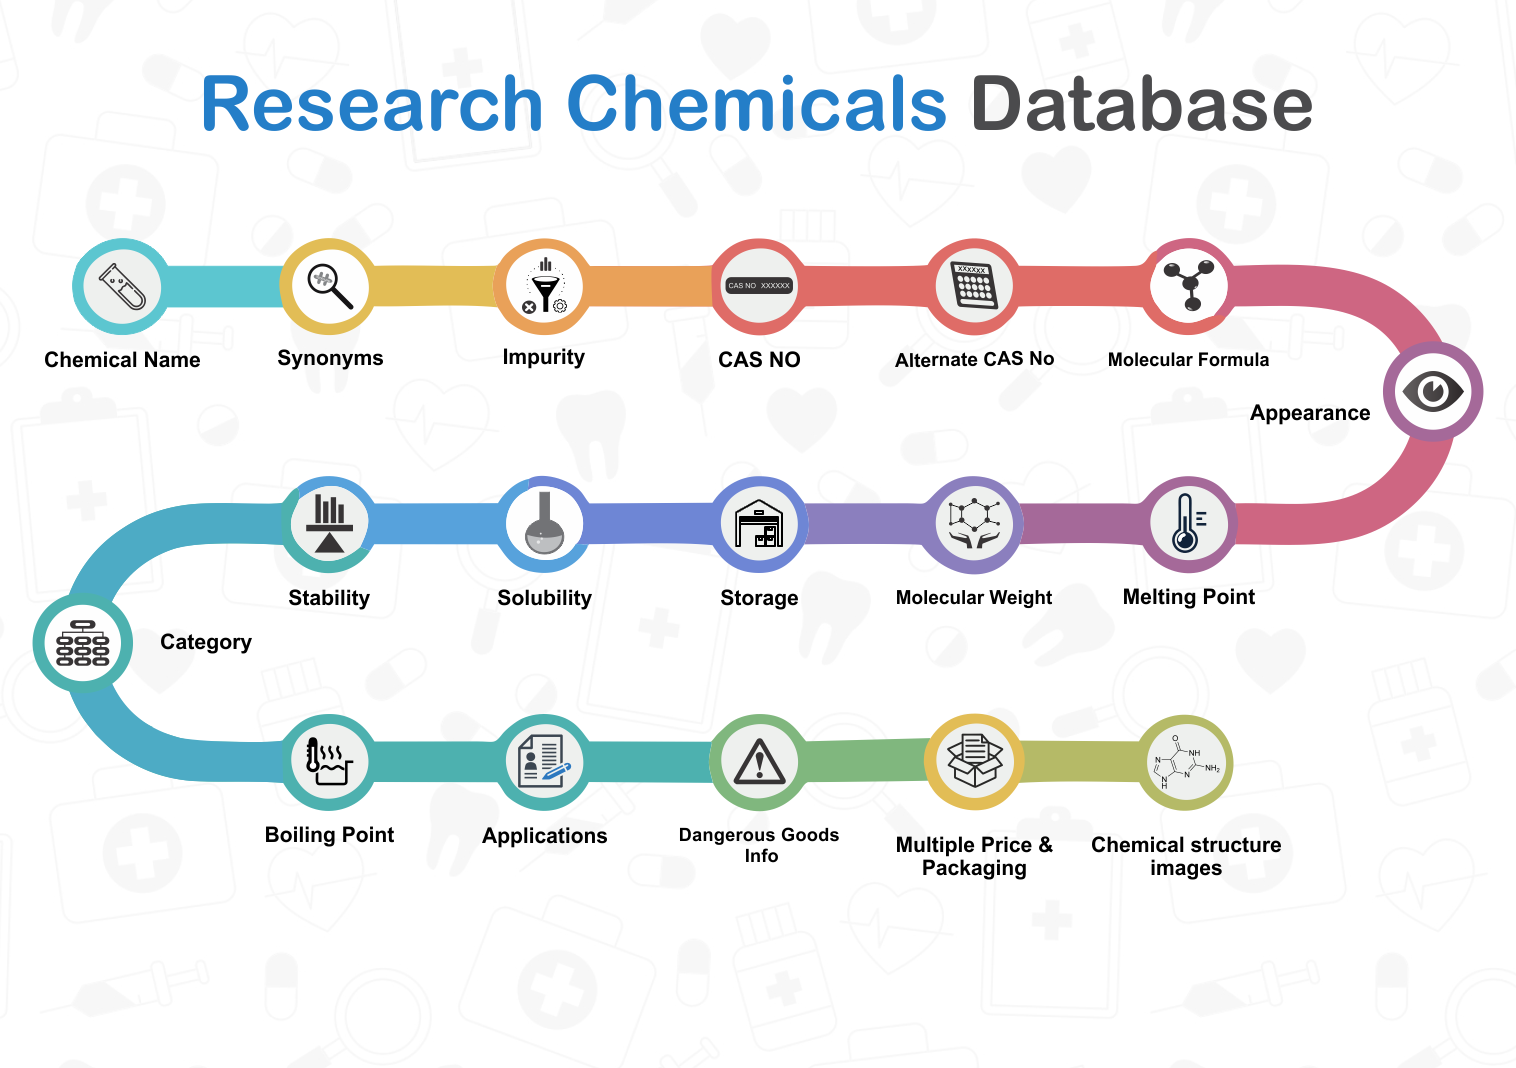 Research Chemicals Database